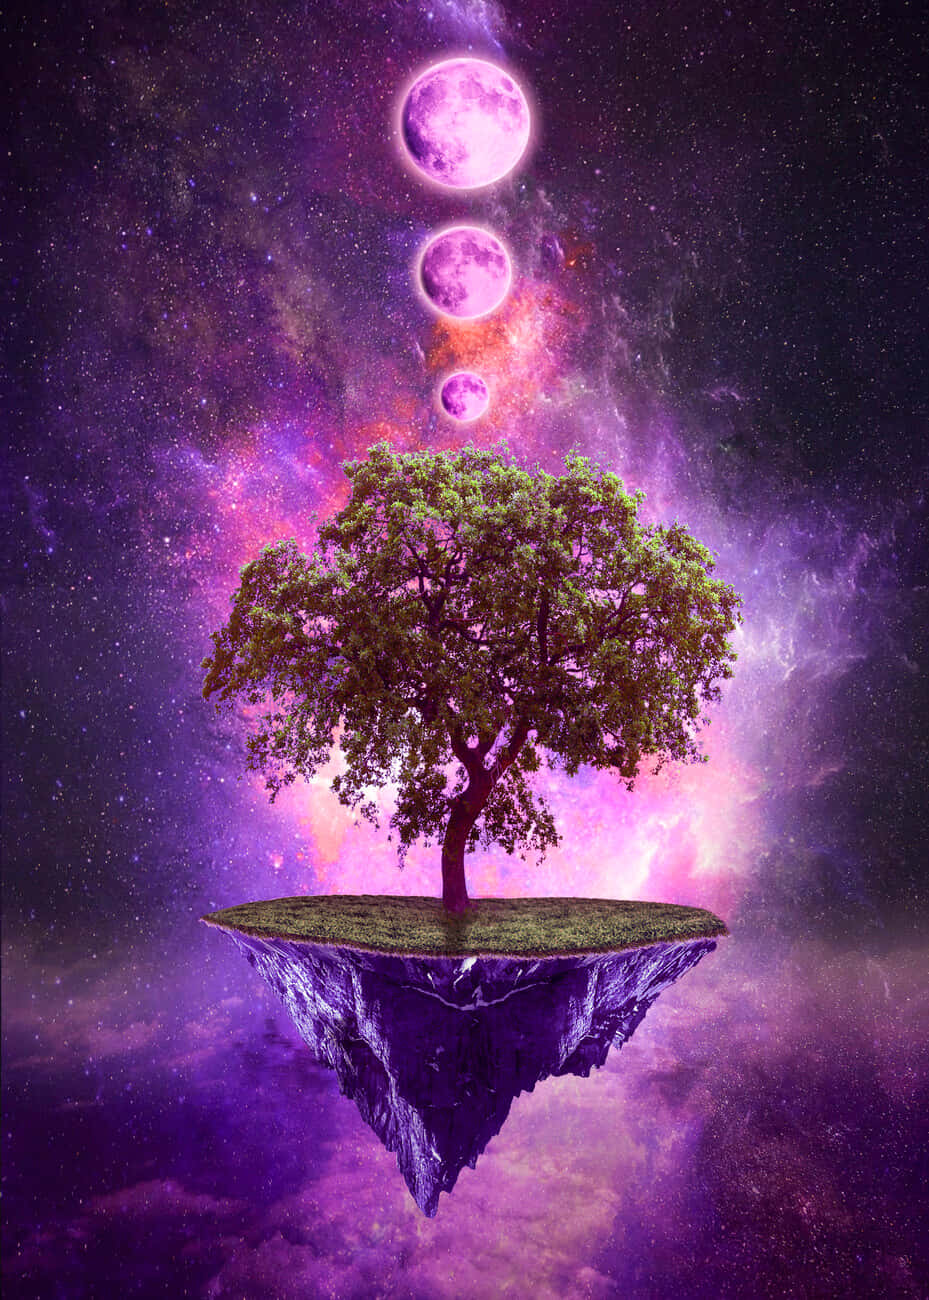 A Tree On An Island In The Middle Of The Universe